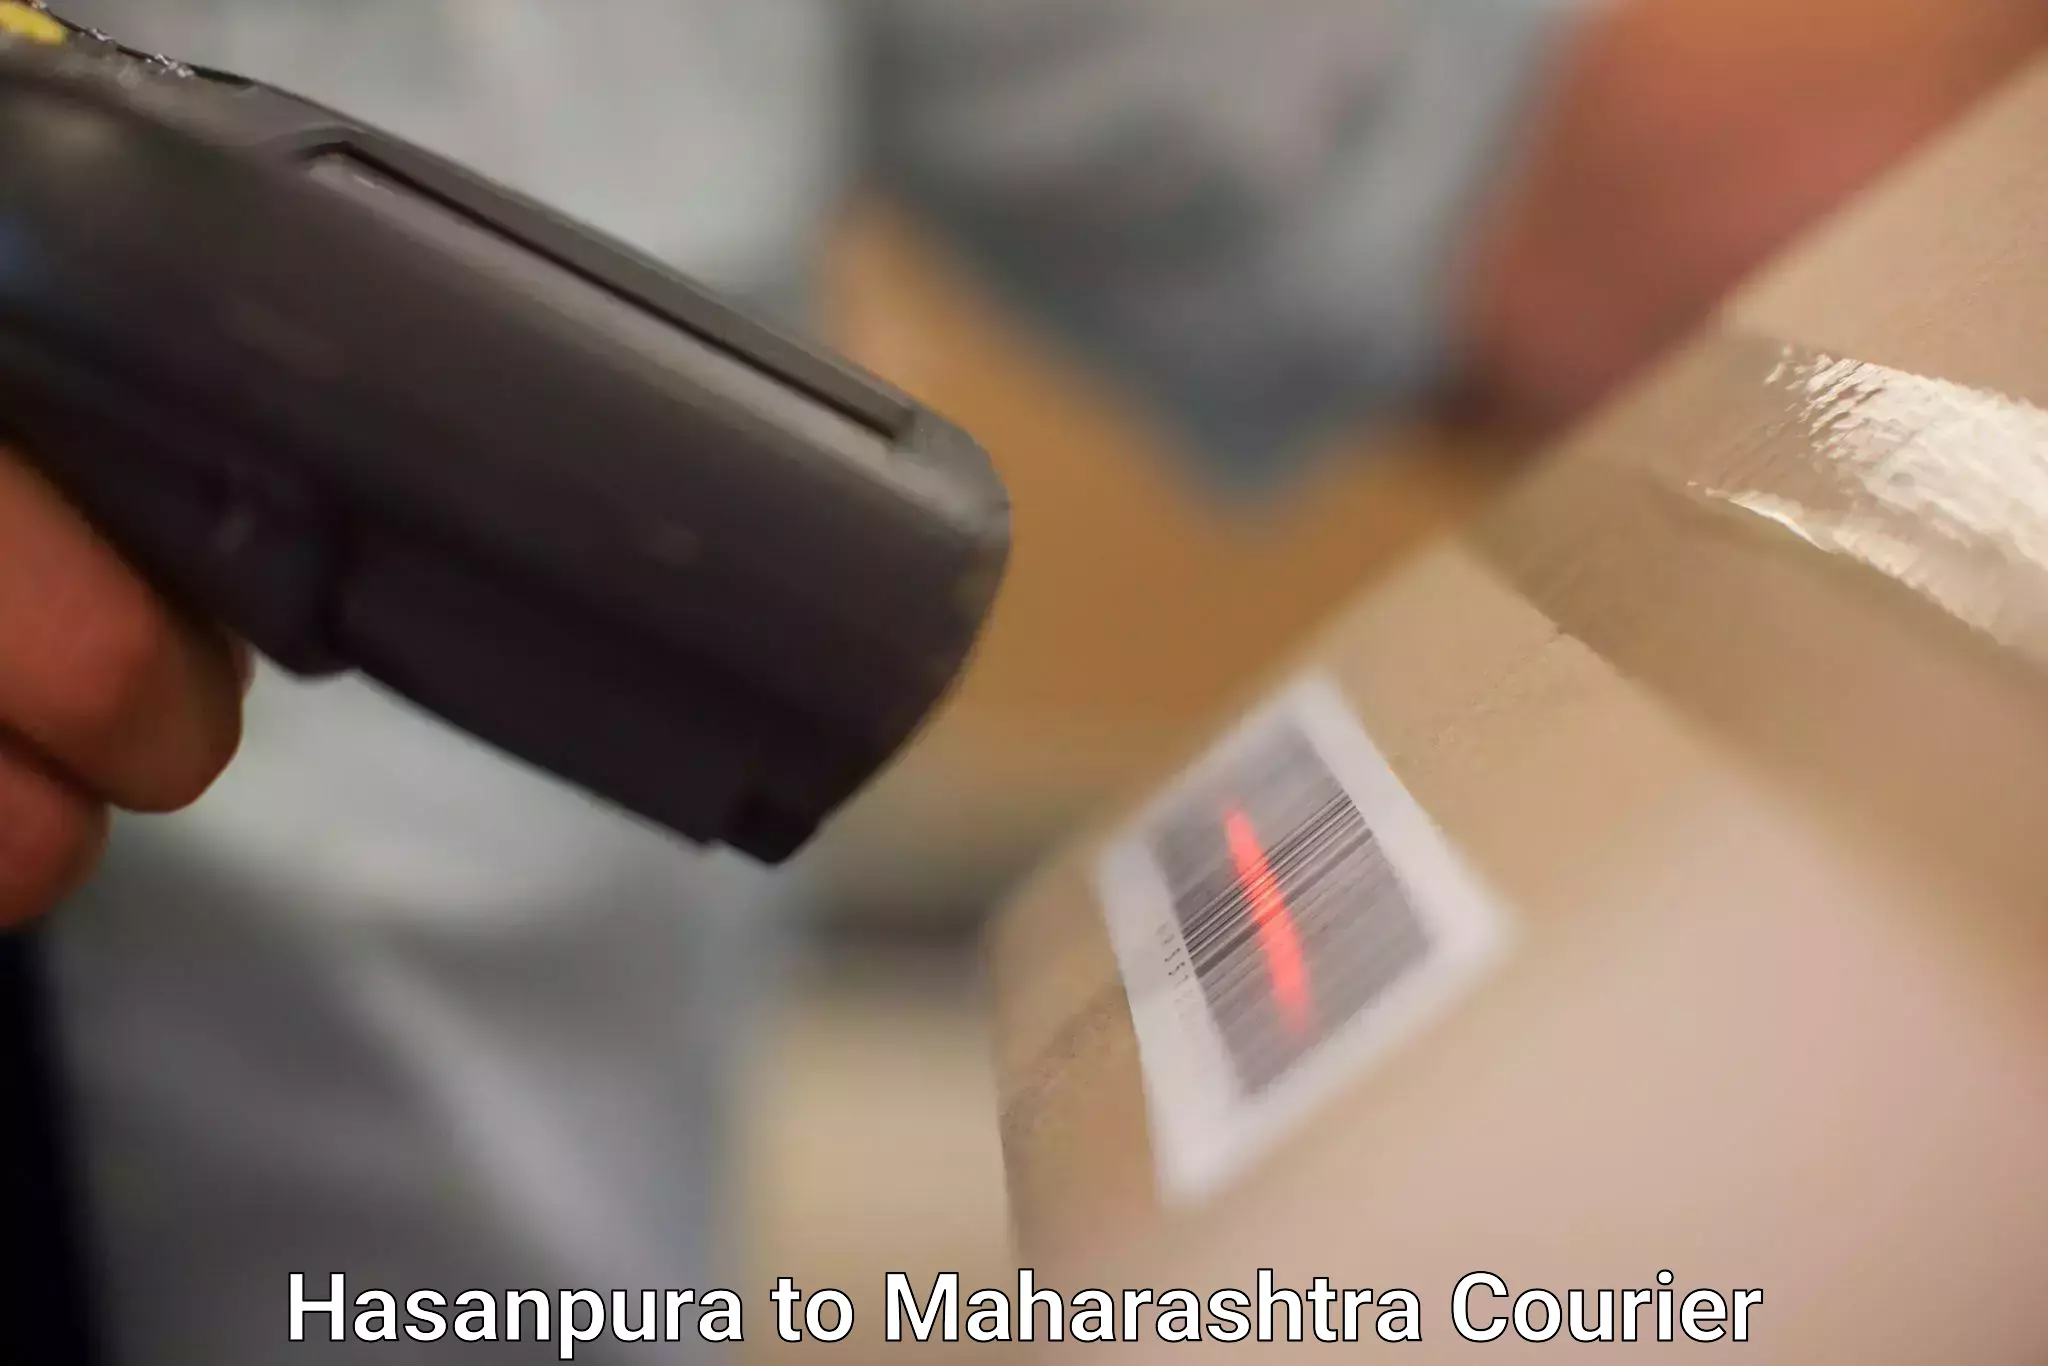 Diverse delivery methods in Hasanpura to Solapur